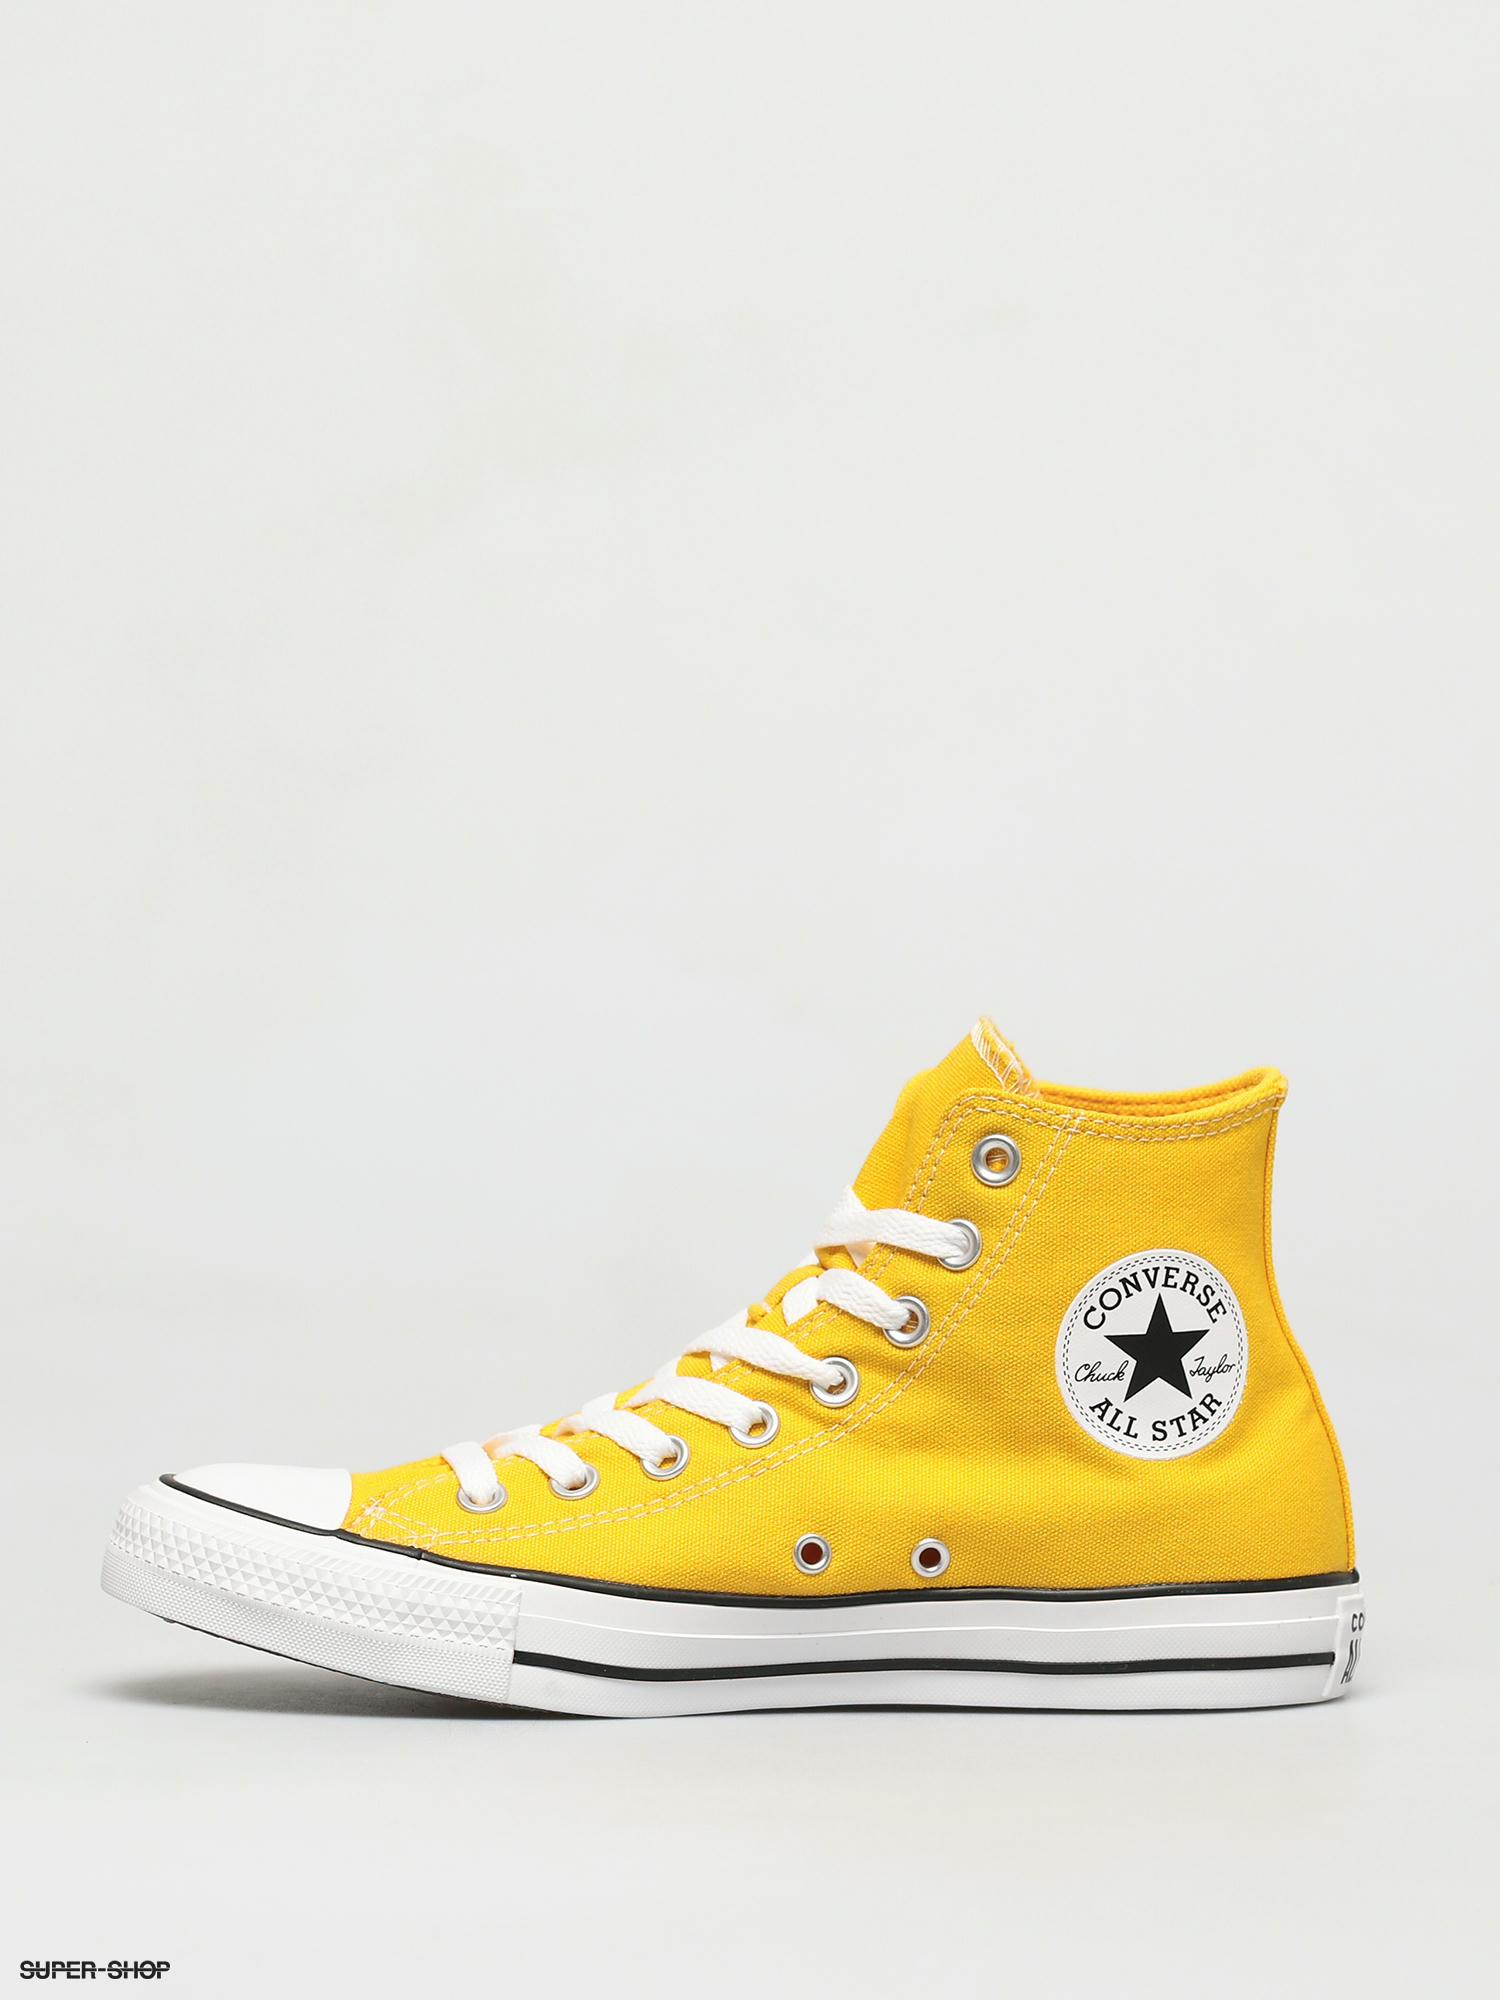 converse sneakers yellow